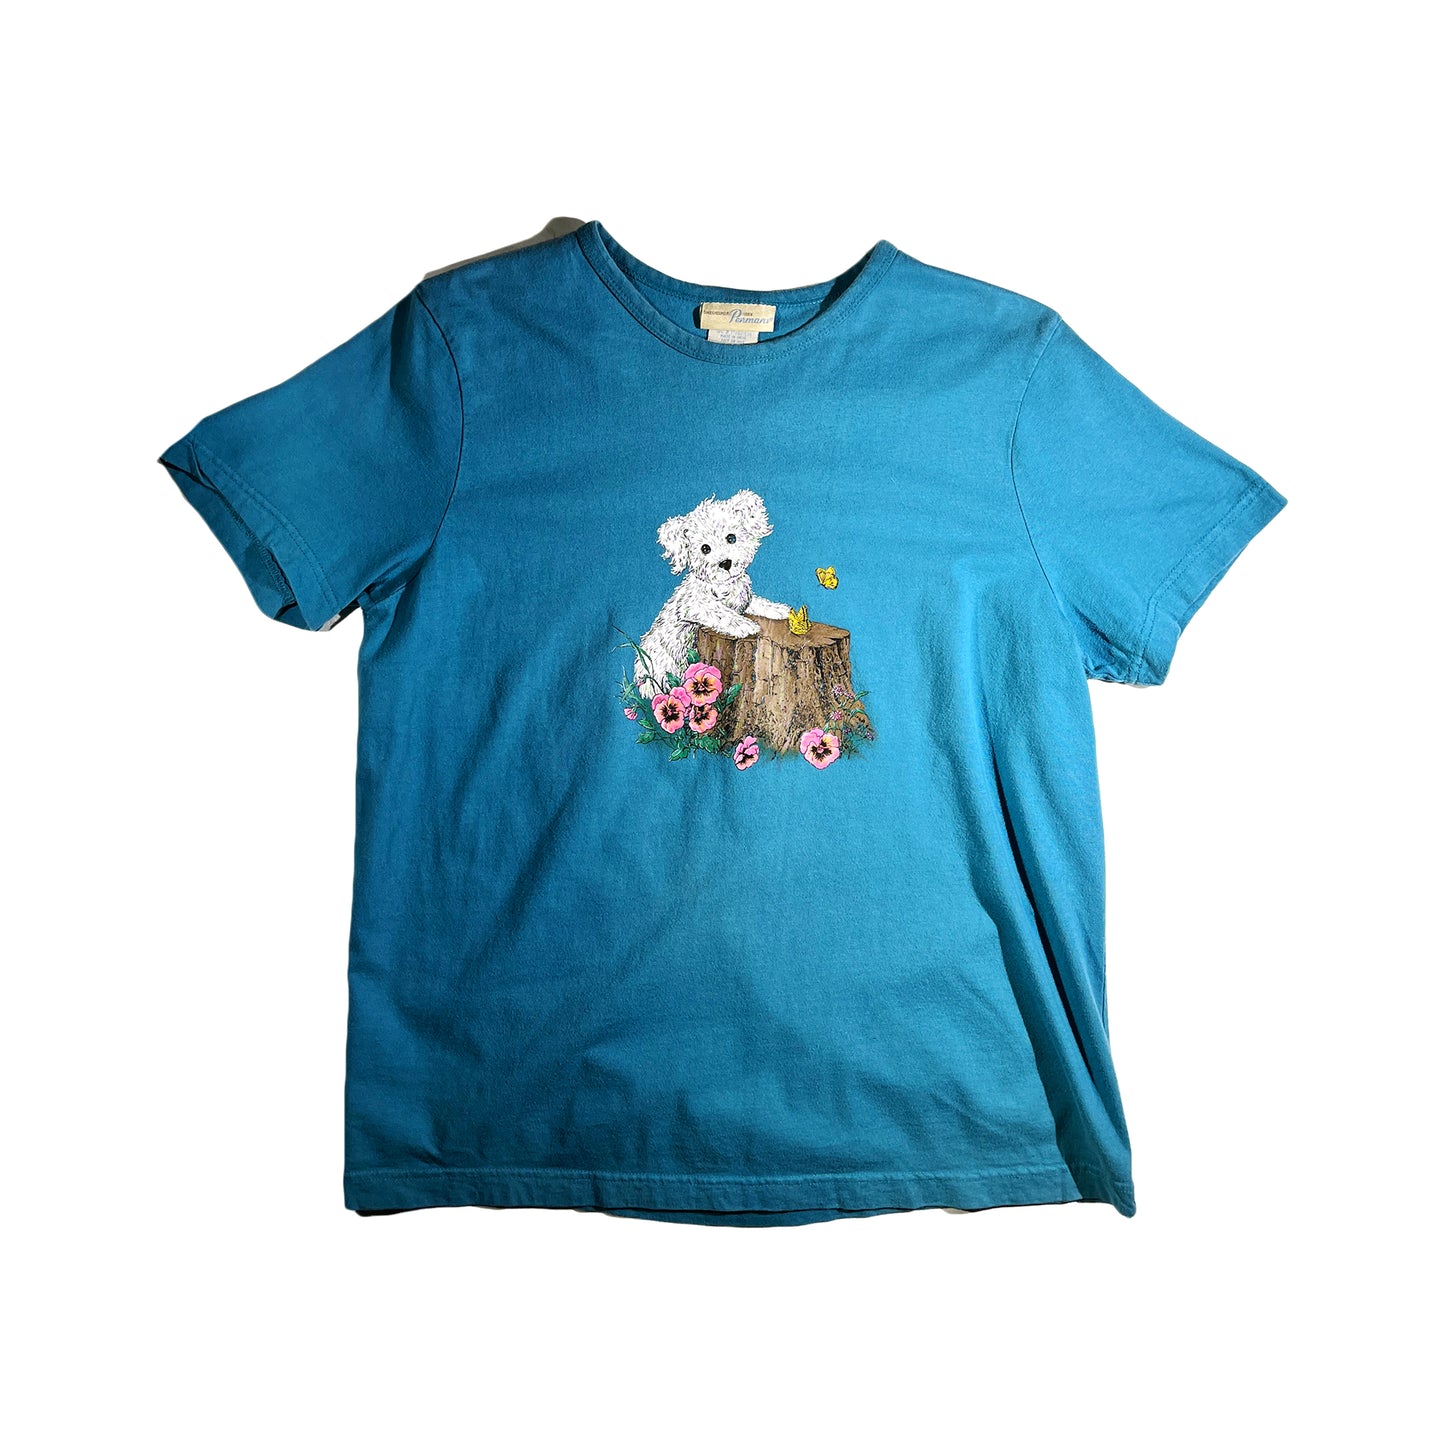 Vintage Puppy T-Shirt Flowers Butterfly